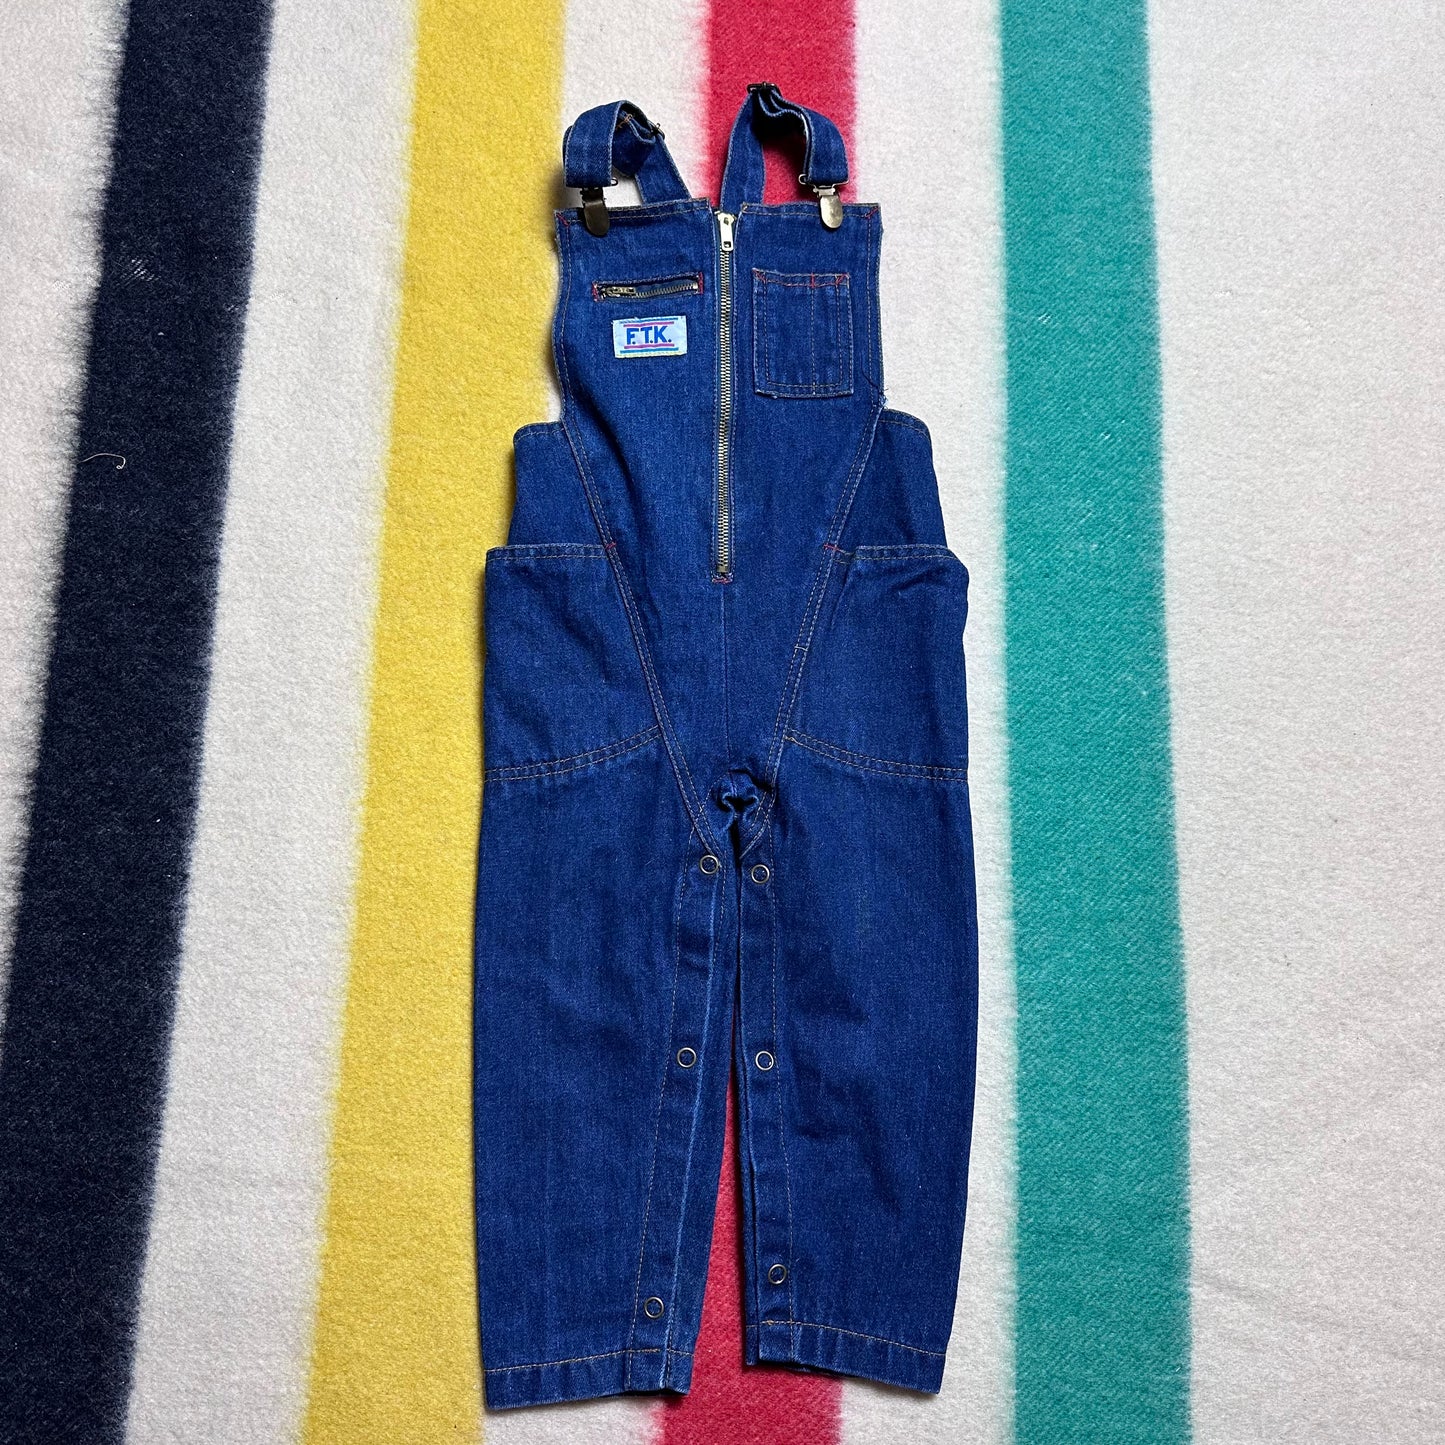 1980s Denim Overalls, French Toast by Lollytogs Size 24m, Front Zipper, Strap Clips